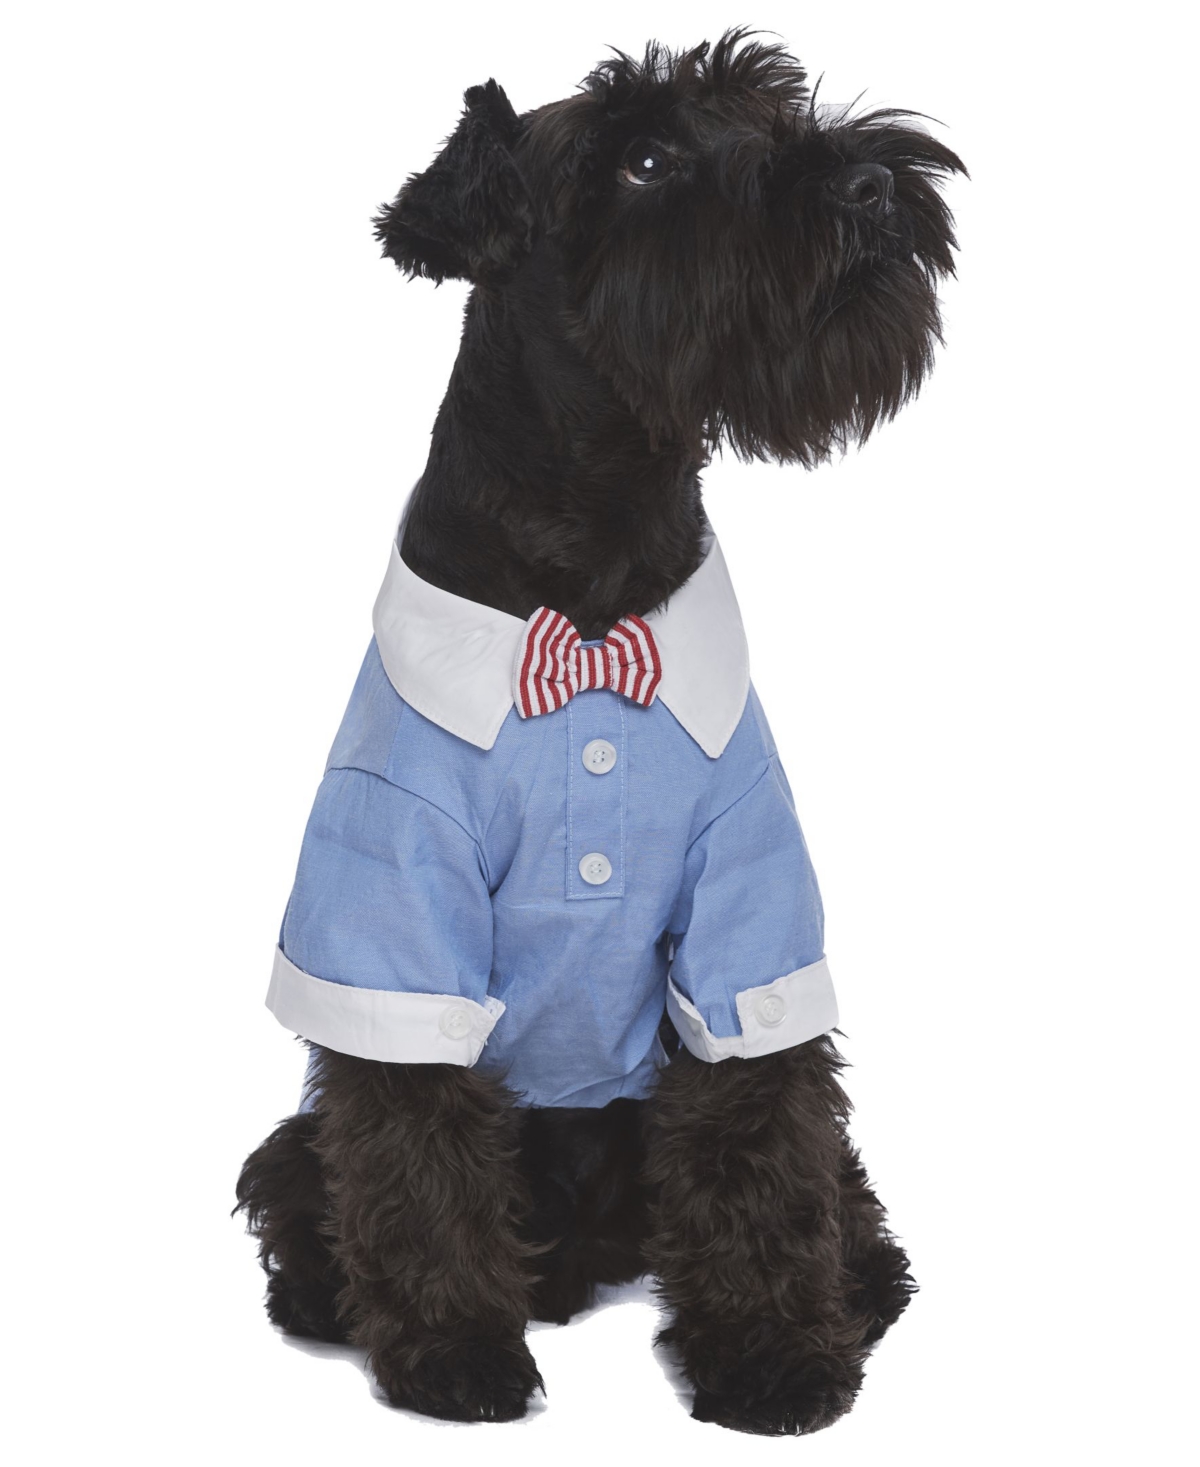 Square Cuff Dog Shirt With Bow Tie - Blue